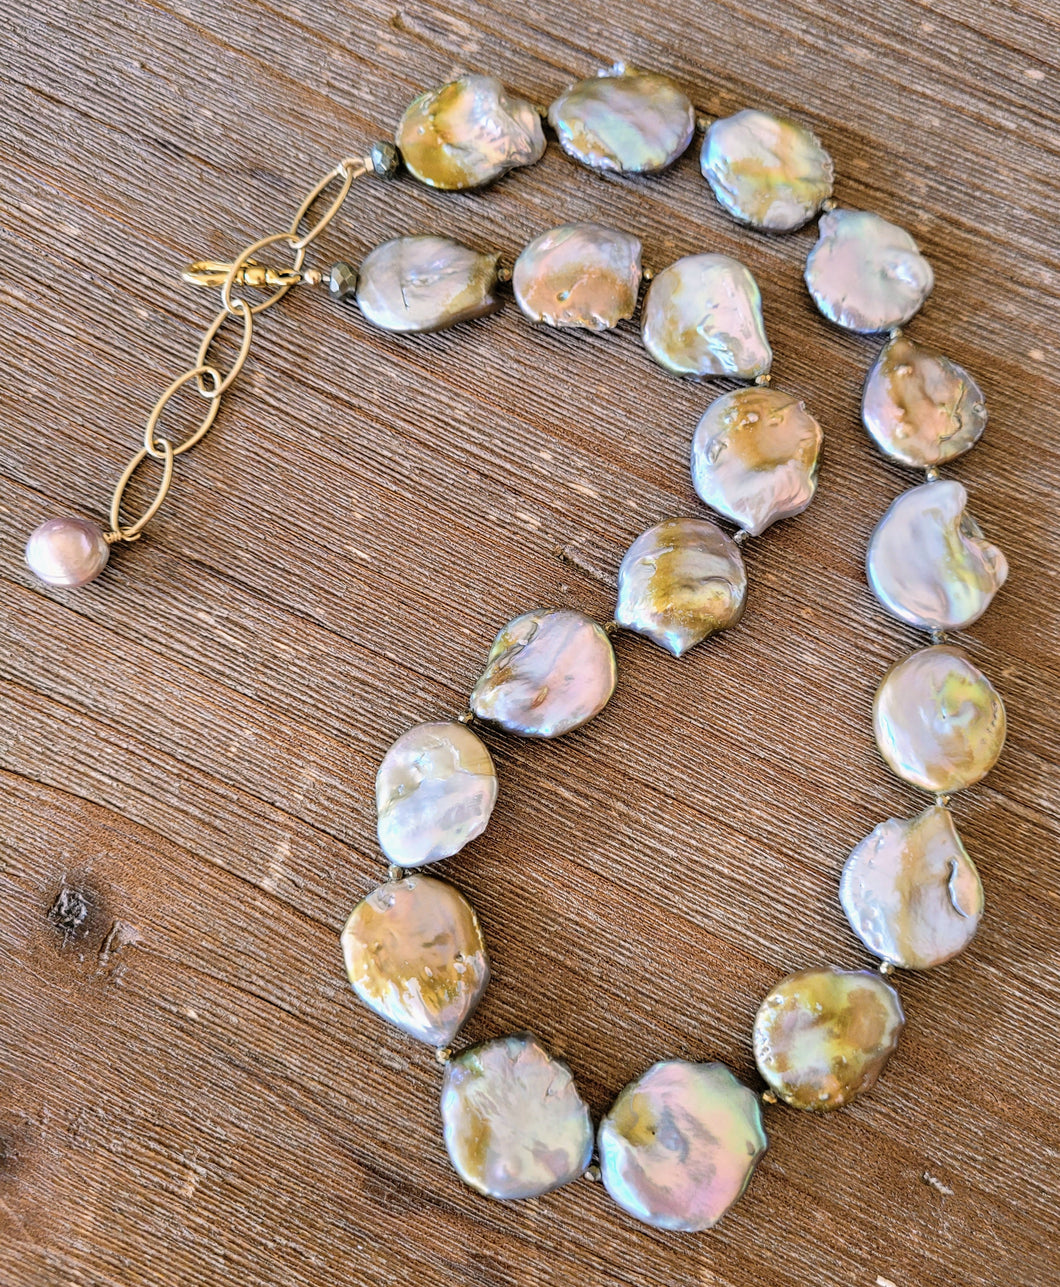 Unique Natural Jumbo Coin Pearl Necklace